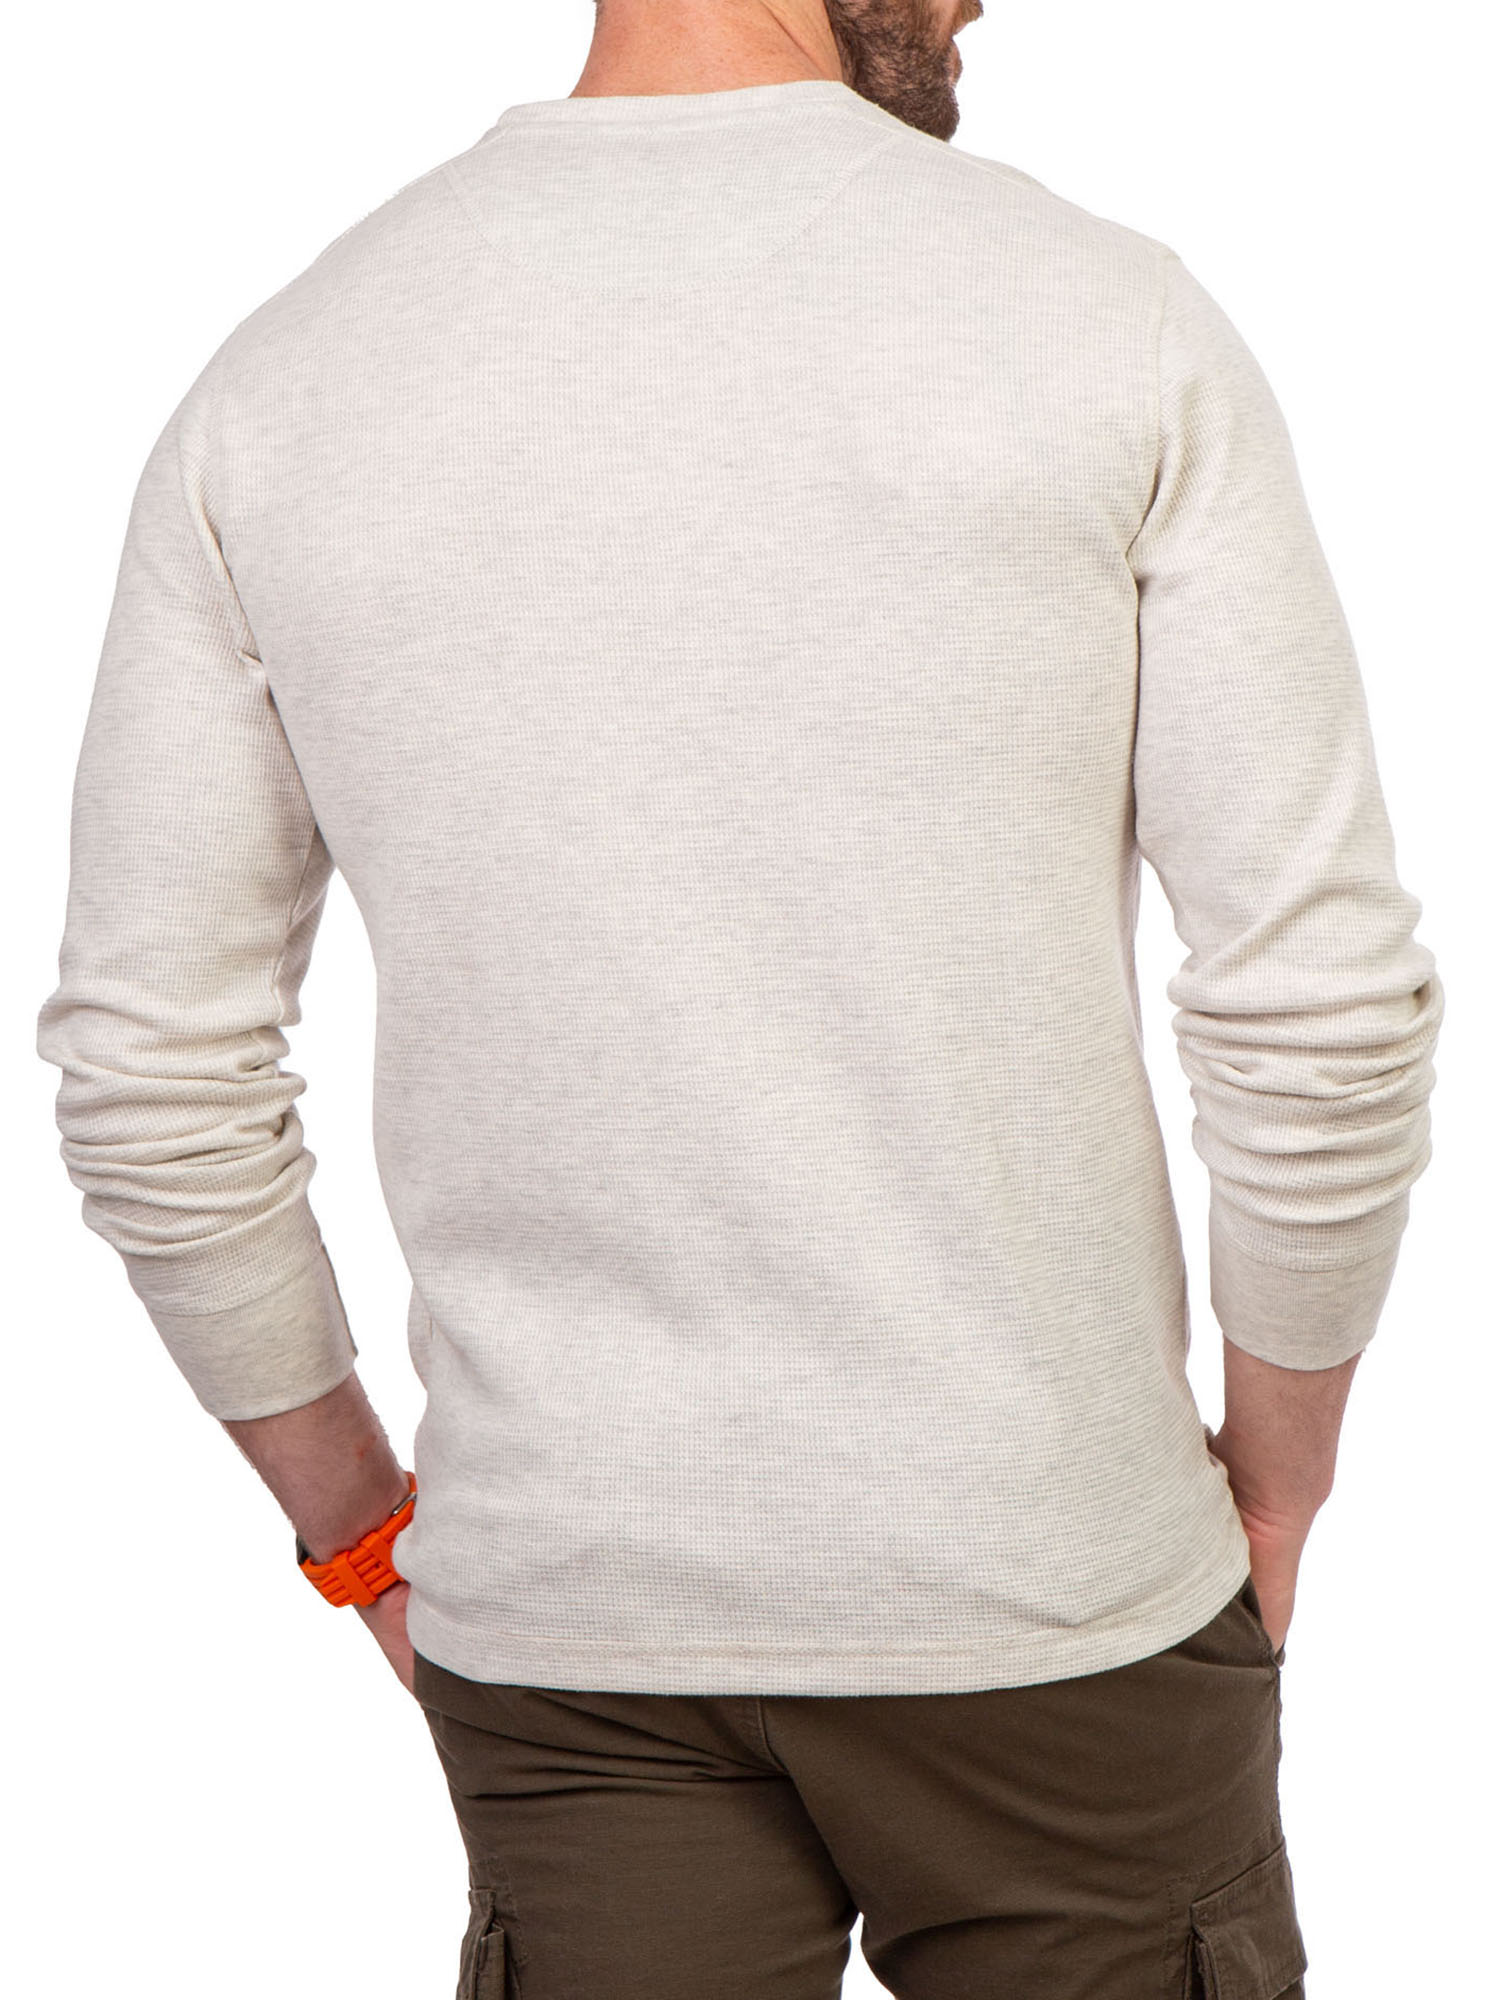 U.S. Polo Assn. Men's Crew Neck Thermal - image 3 of 4